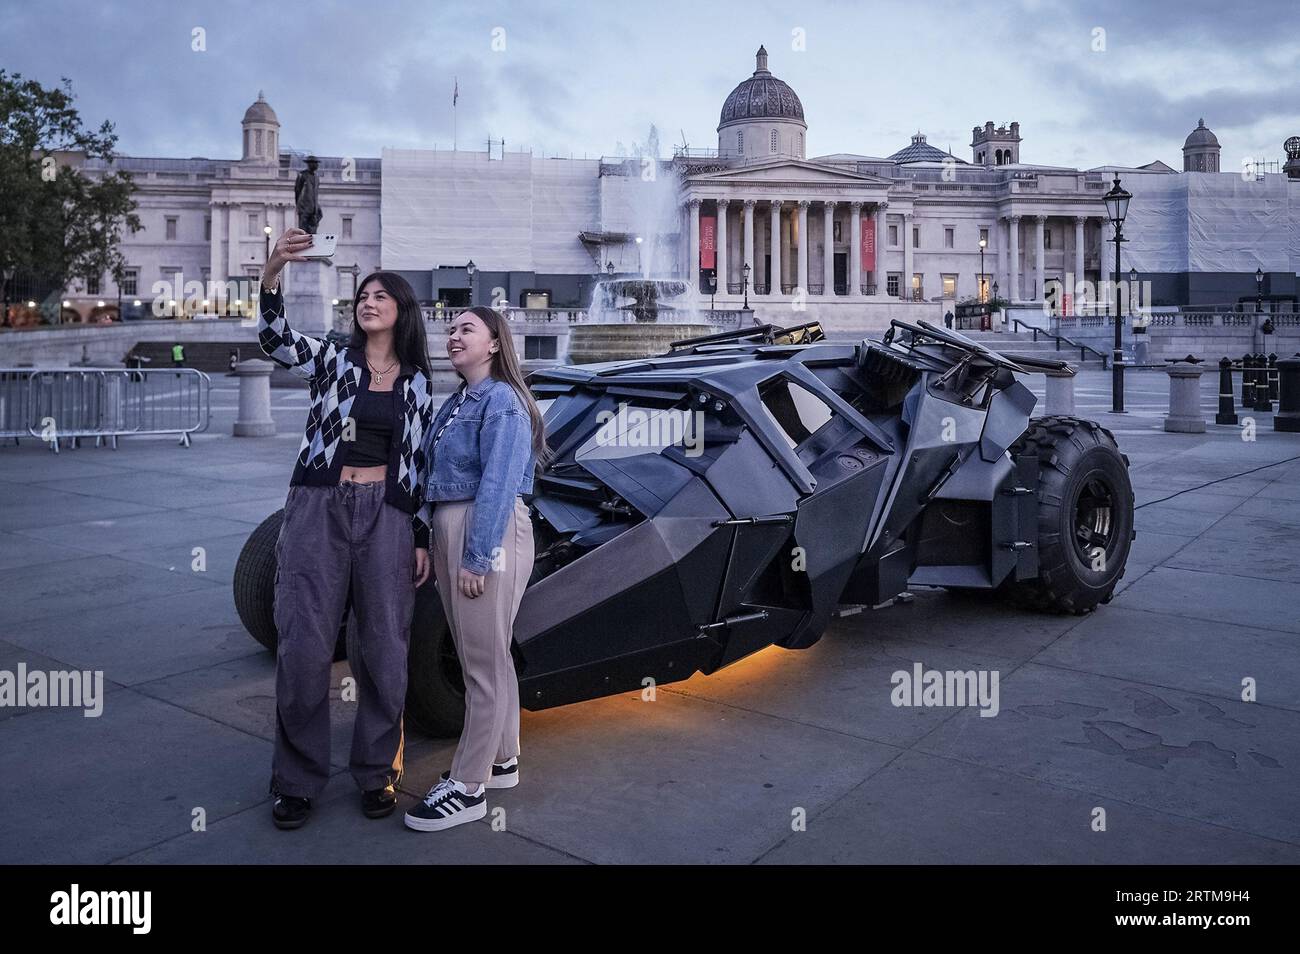 London, UK. 14th September 2023. Global Batman day sees the actual Batmobile Tumbler featured in The Dark Knight Trilogy of movies parked up in Trafalgar Square ahead of annual Batman Day celebrations on 16th September. Credit: Guy Corbishley/Alamy Live News Stock Photo